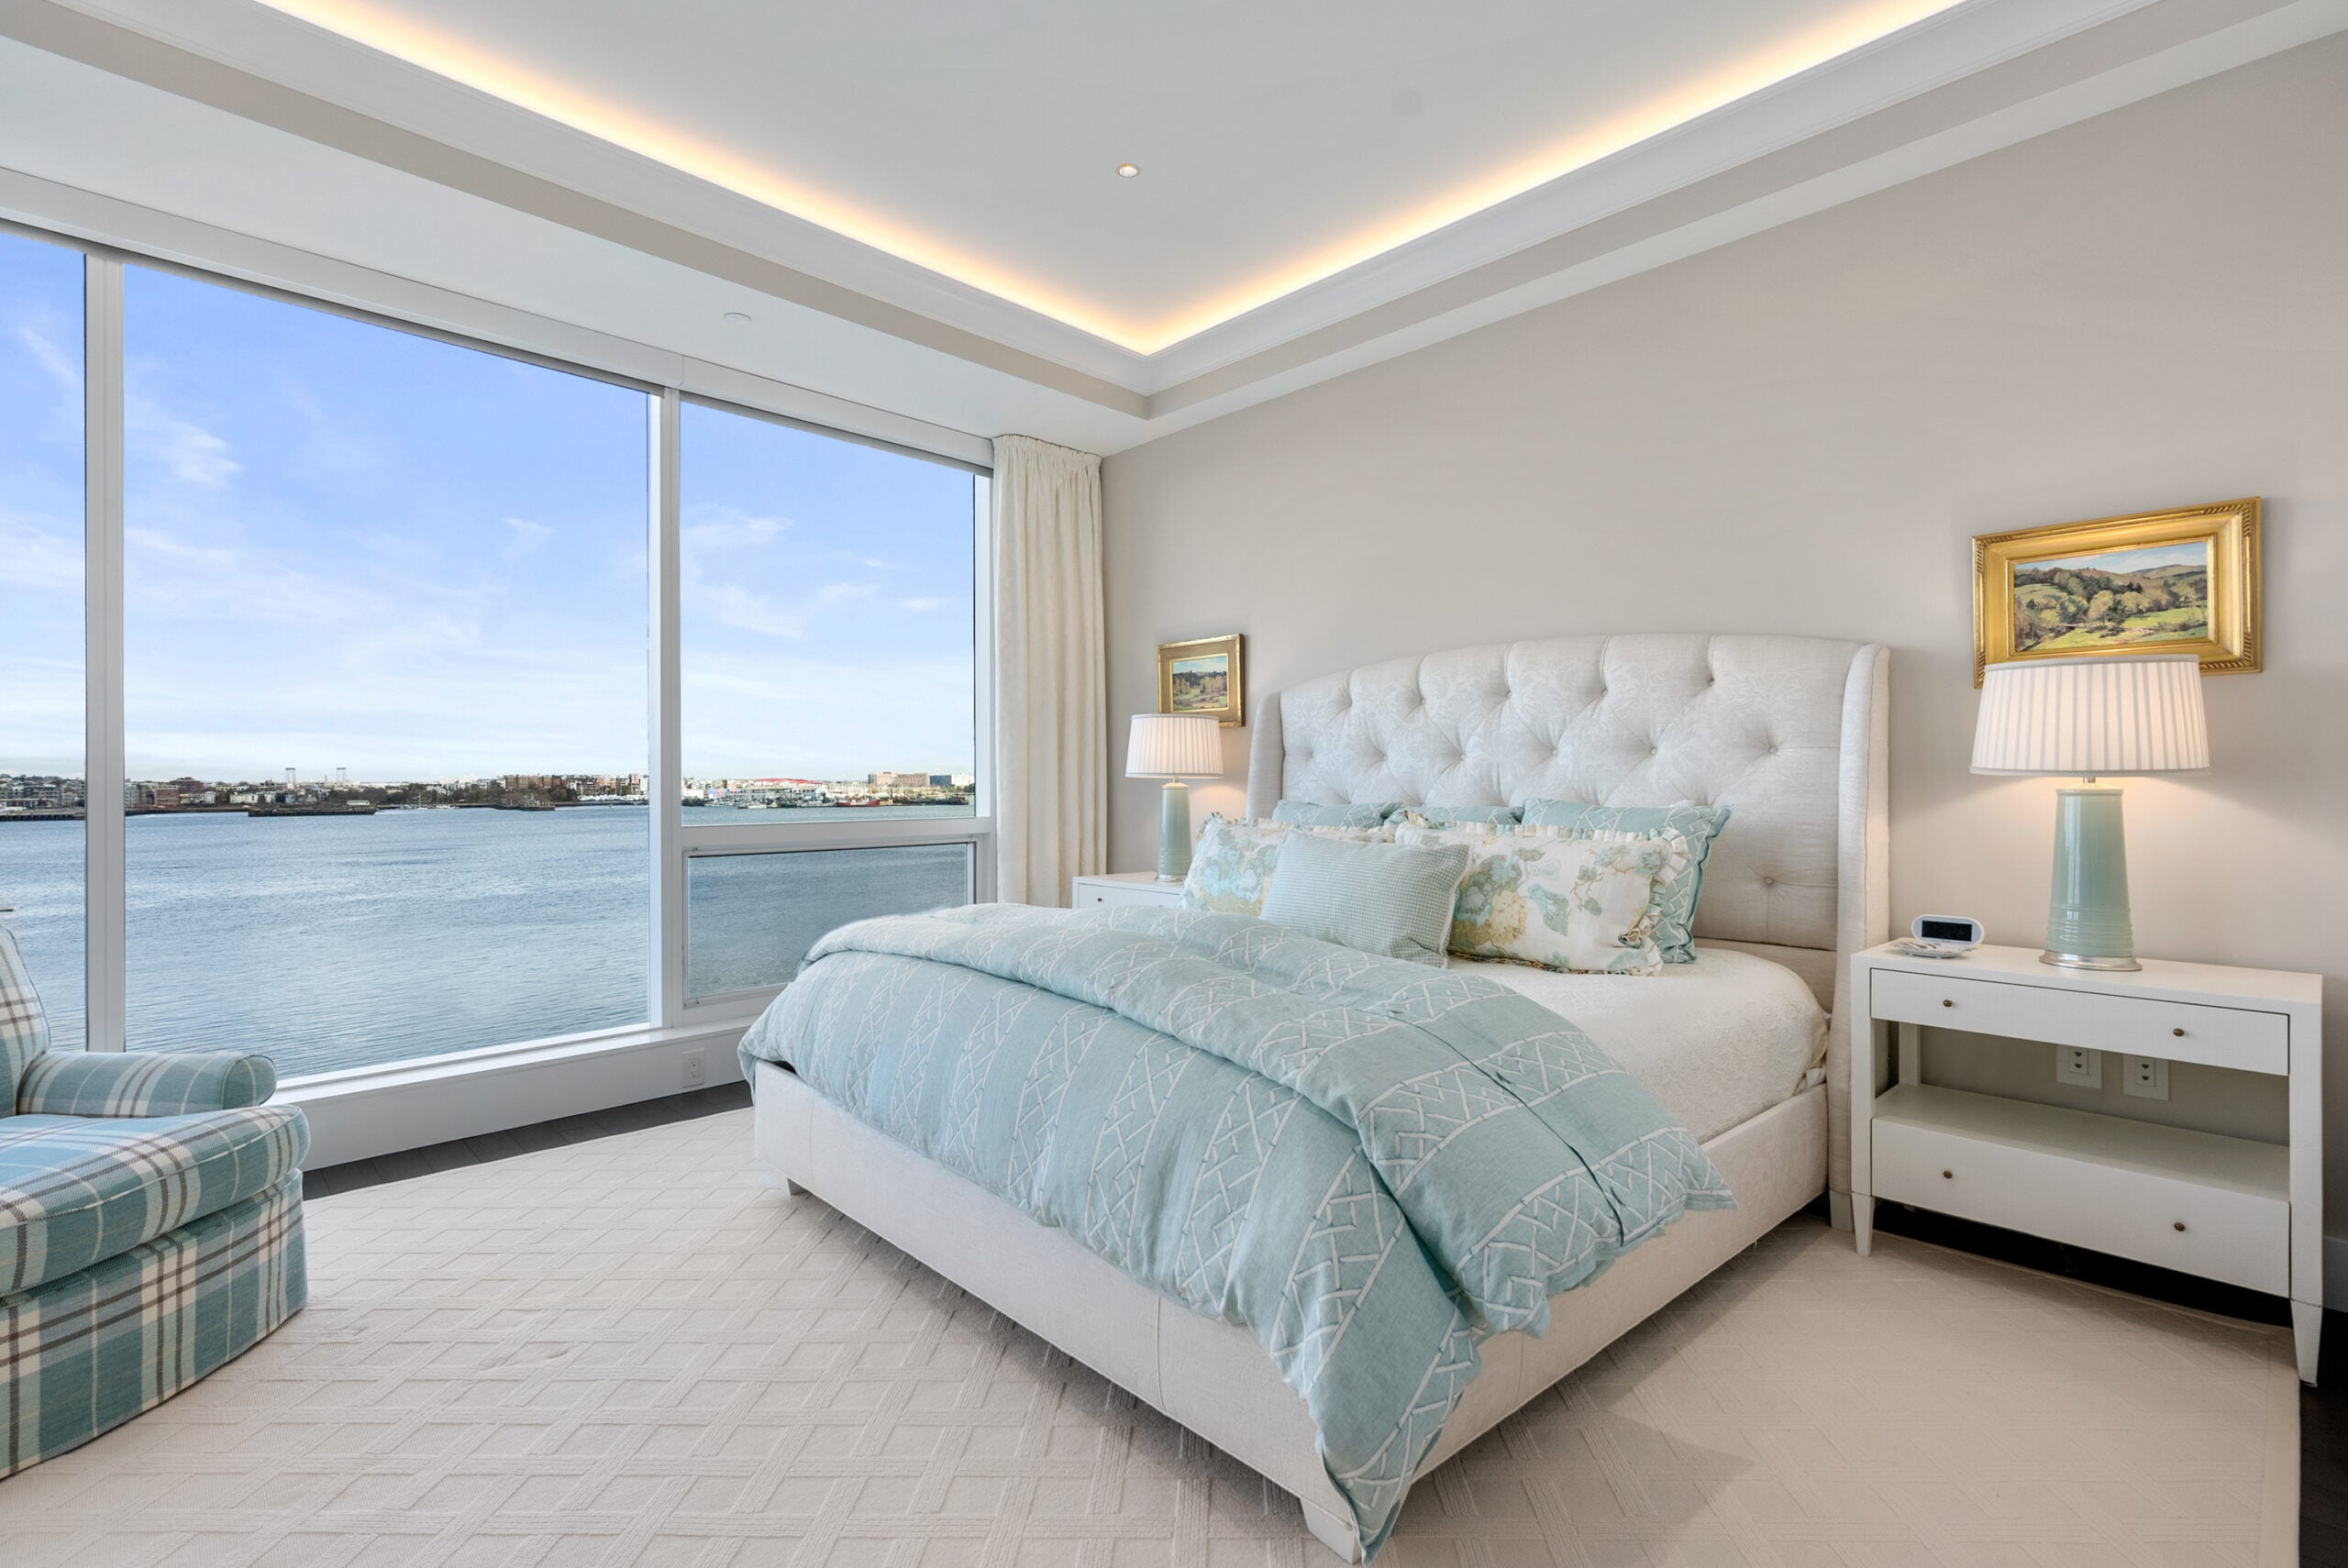 22-liberty-drive-6A-seaport-primary-bed